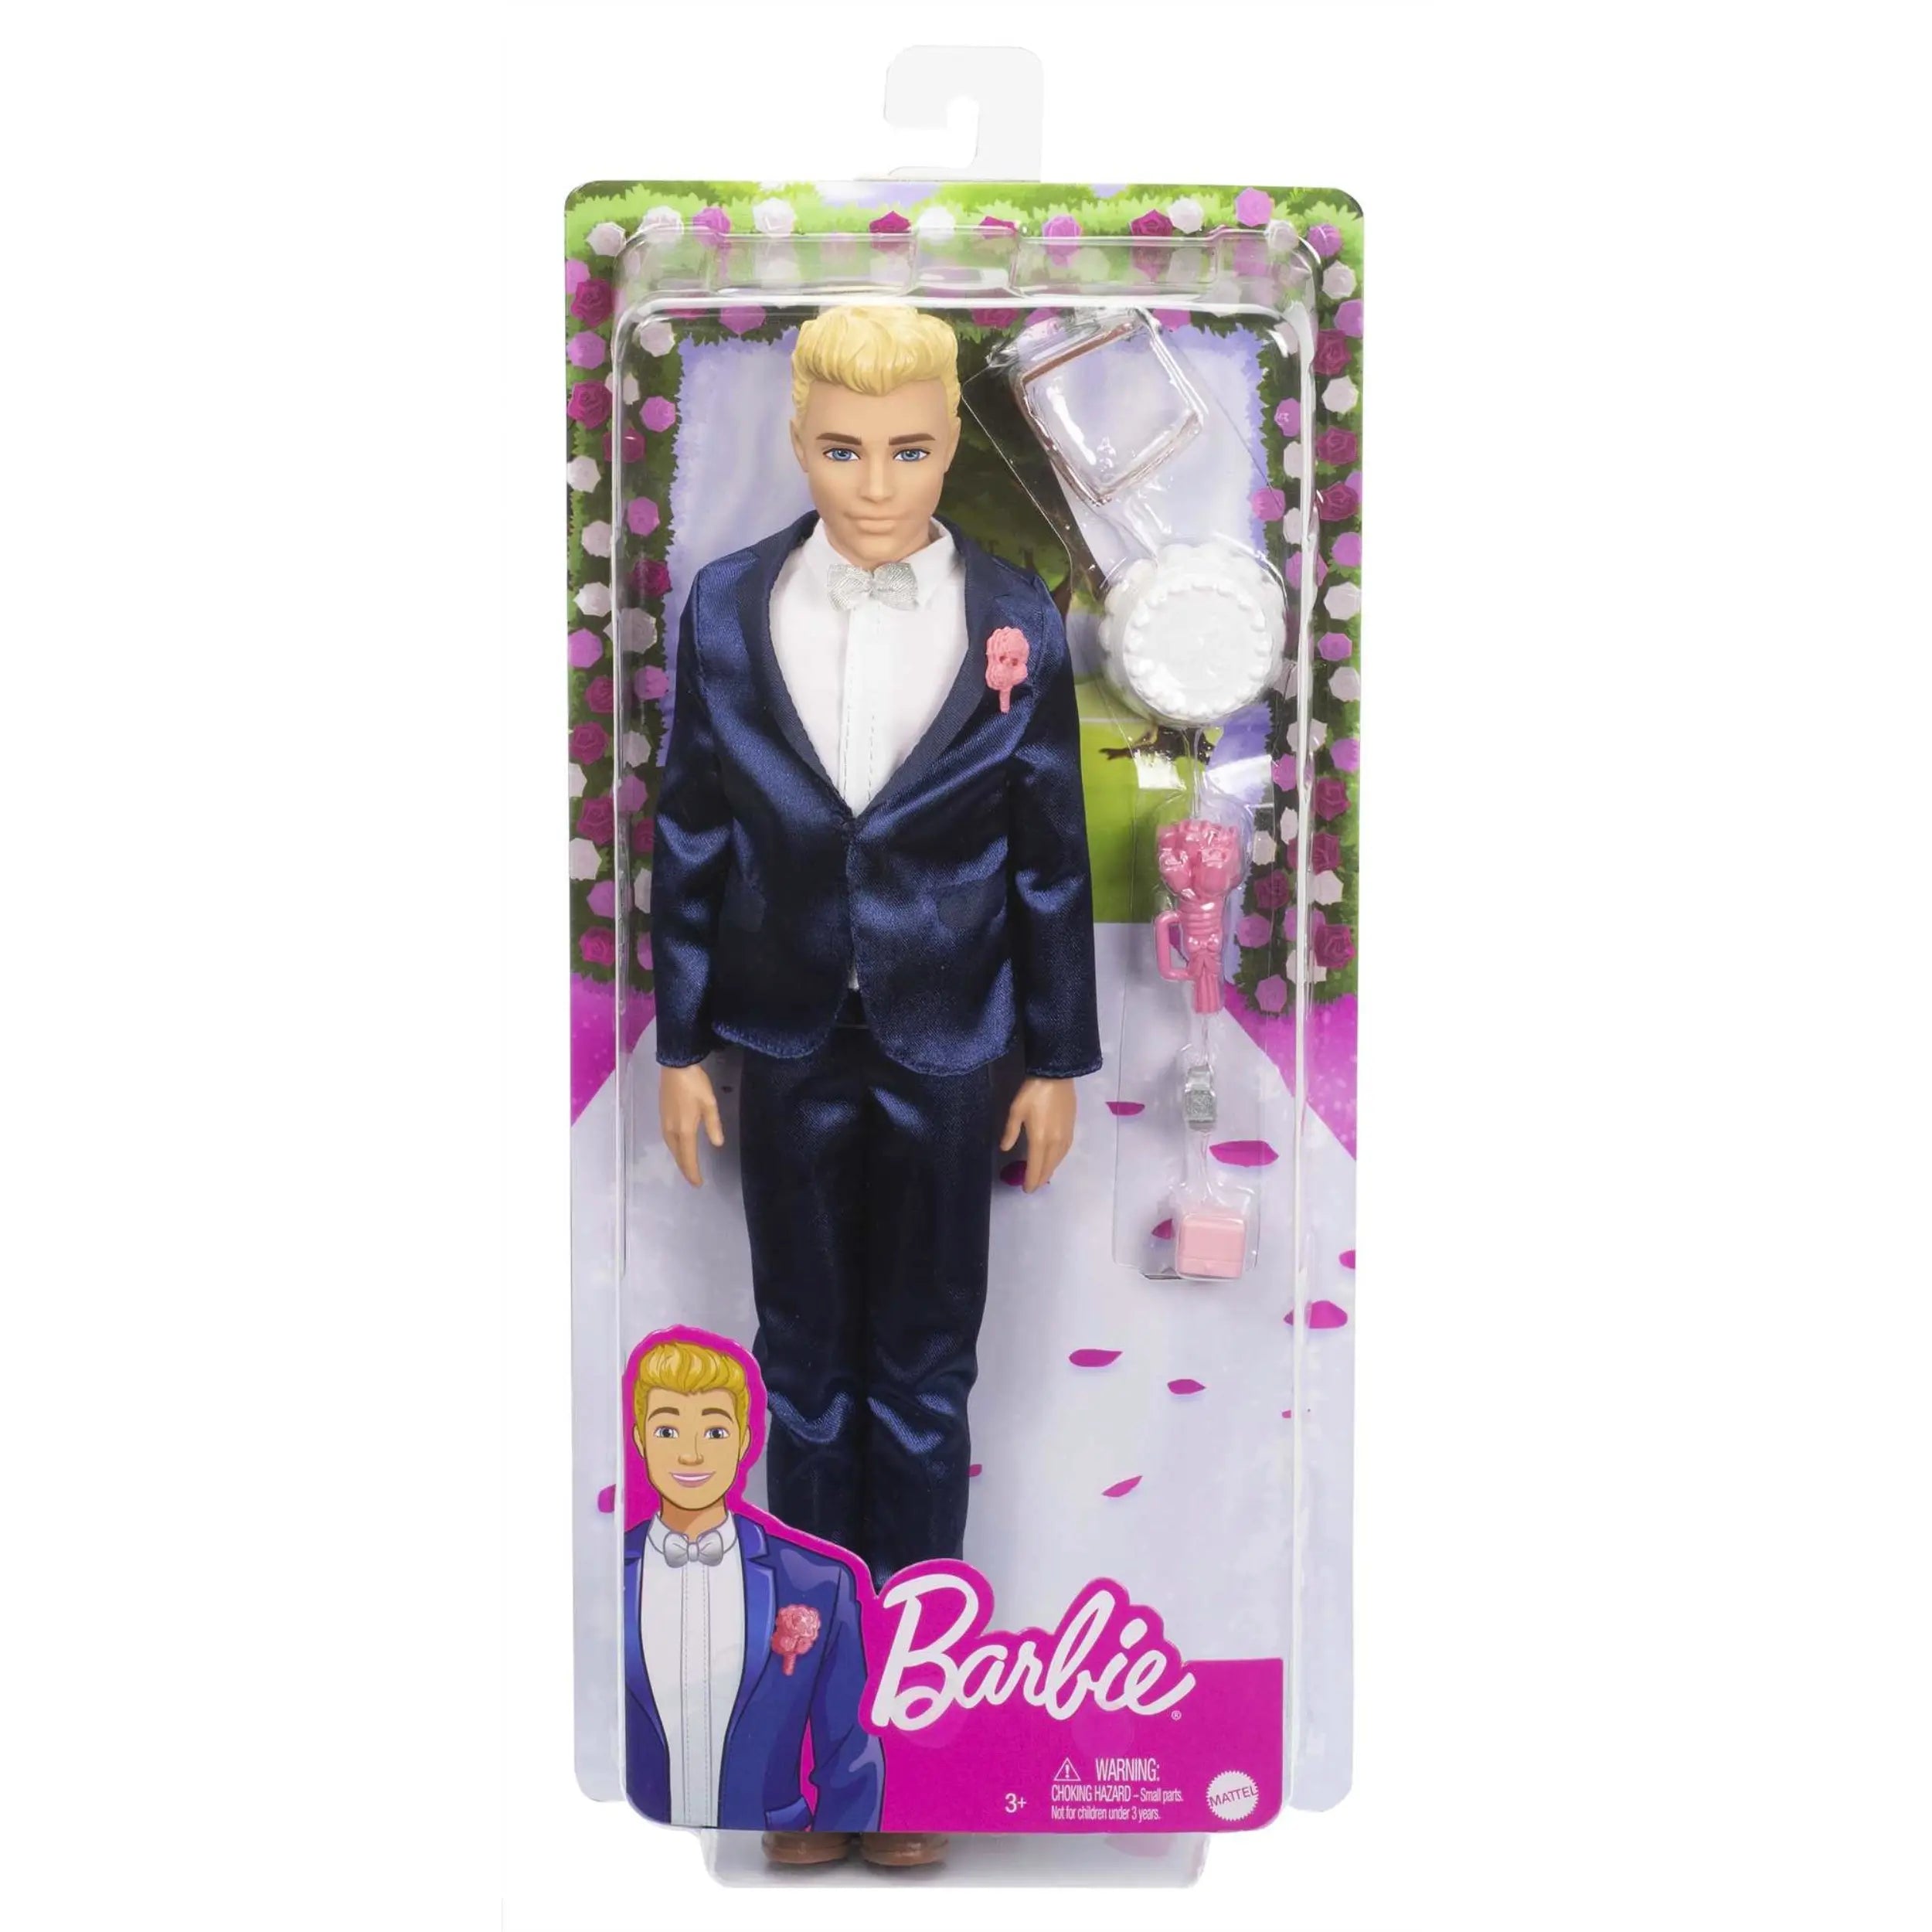 Mattel - Barbie Fairytale Ken Groom Doll (Blonde 12-Inch) Wearing Suit and Shoes, with 5 Accessories - Mod: GTF36